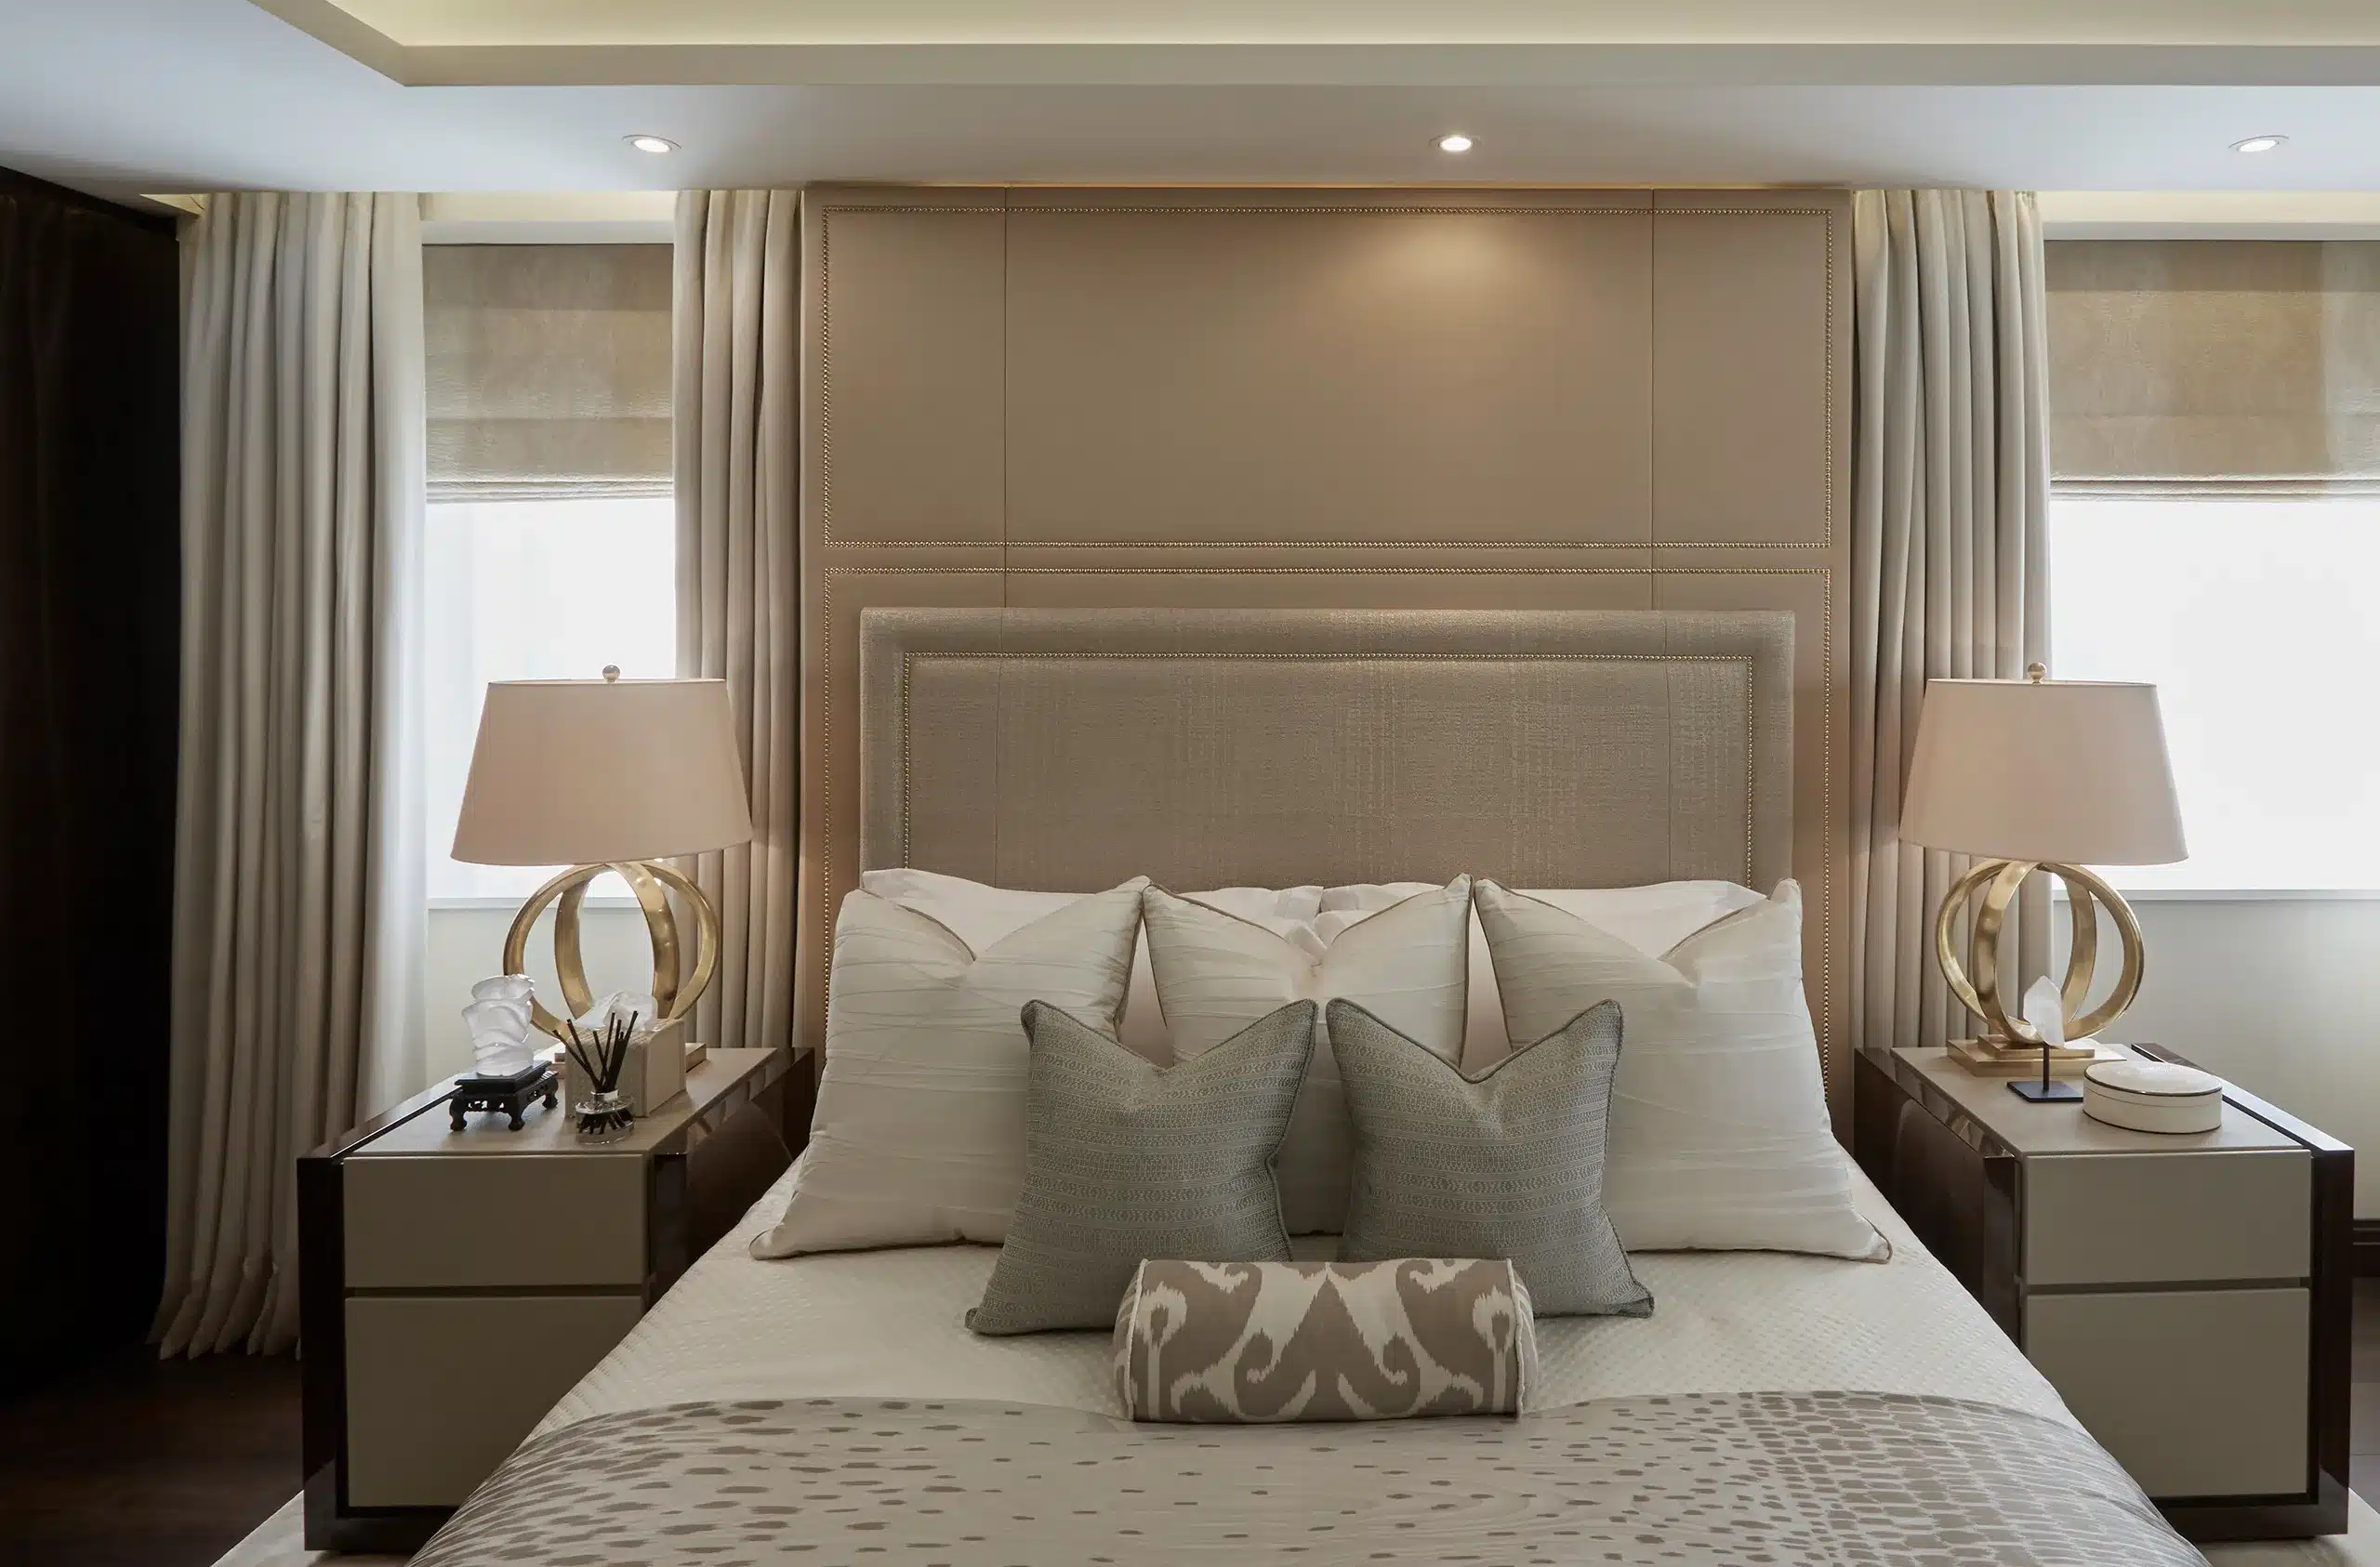 Master bedroom details at one of katharine pooleys interior design projects